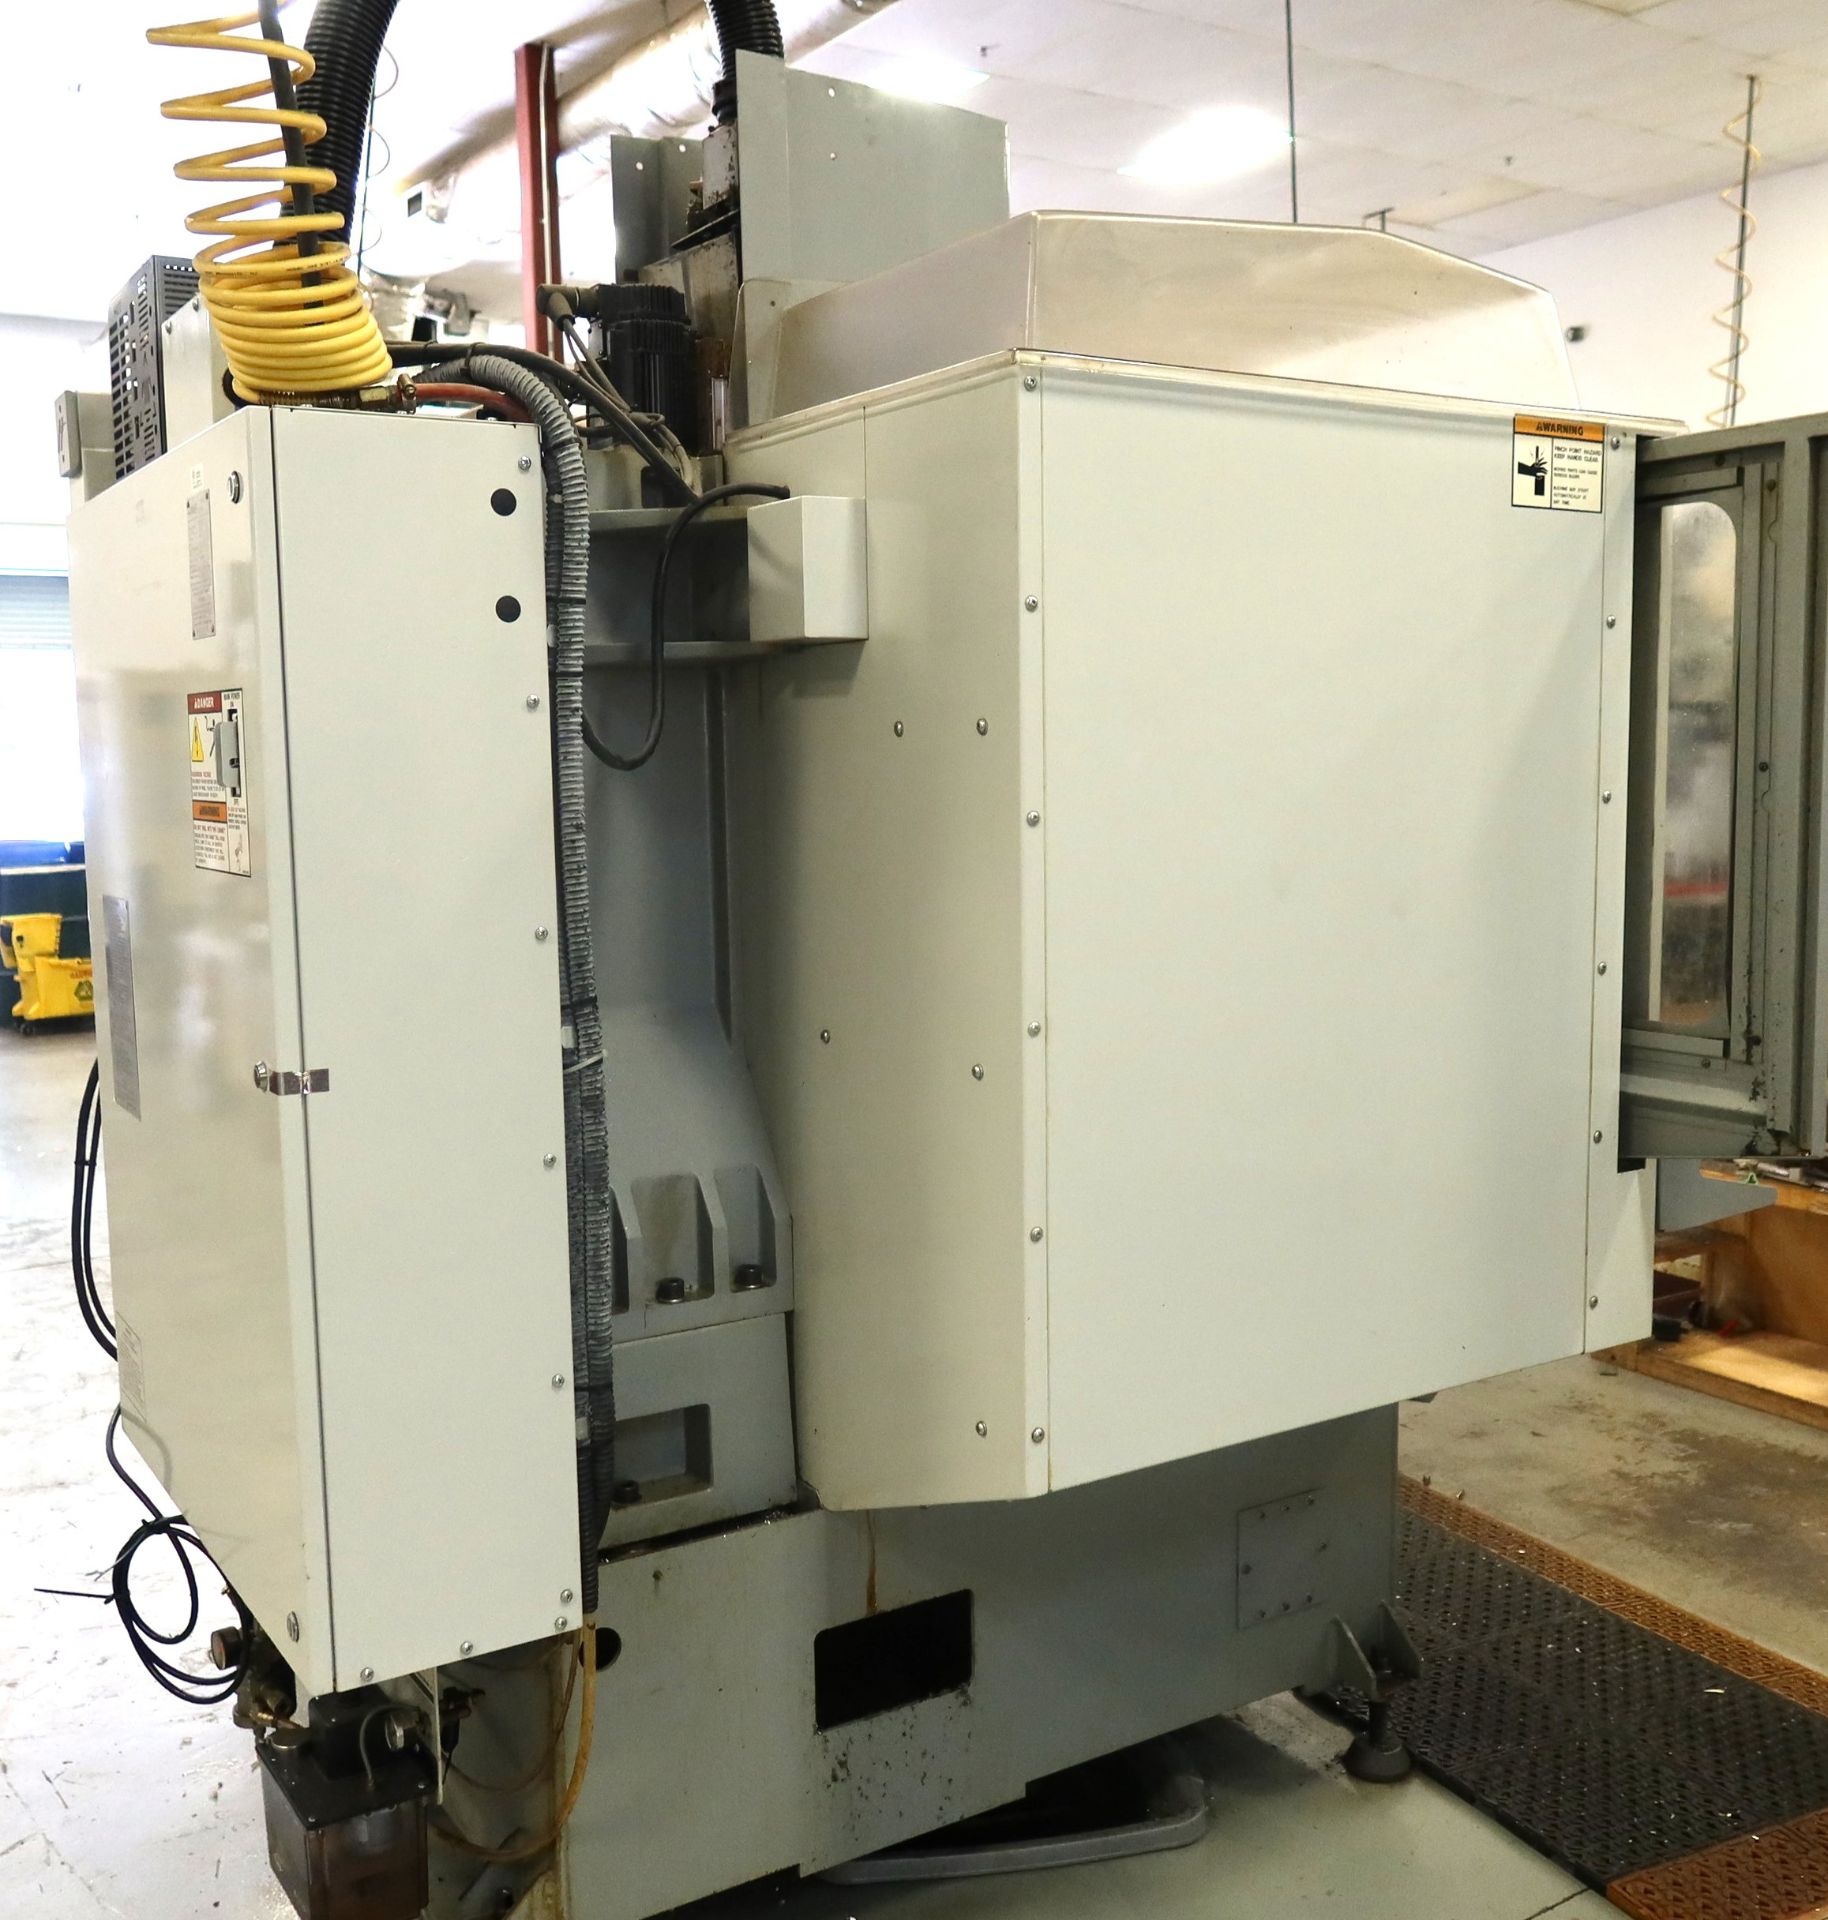 2006 Haas Mini Mill CNC 4-Axis Vertical Machining Center, SN 1053877 - Image 5 of 7